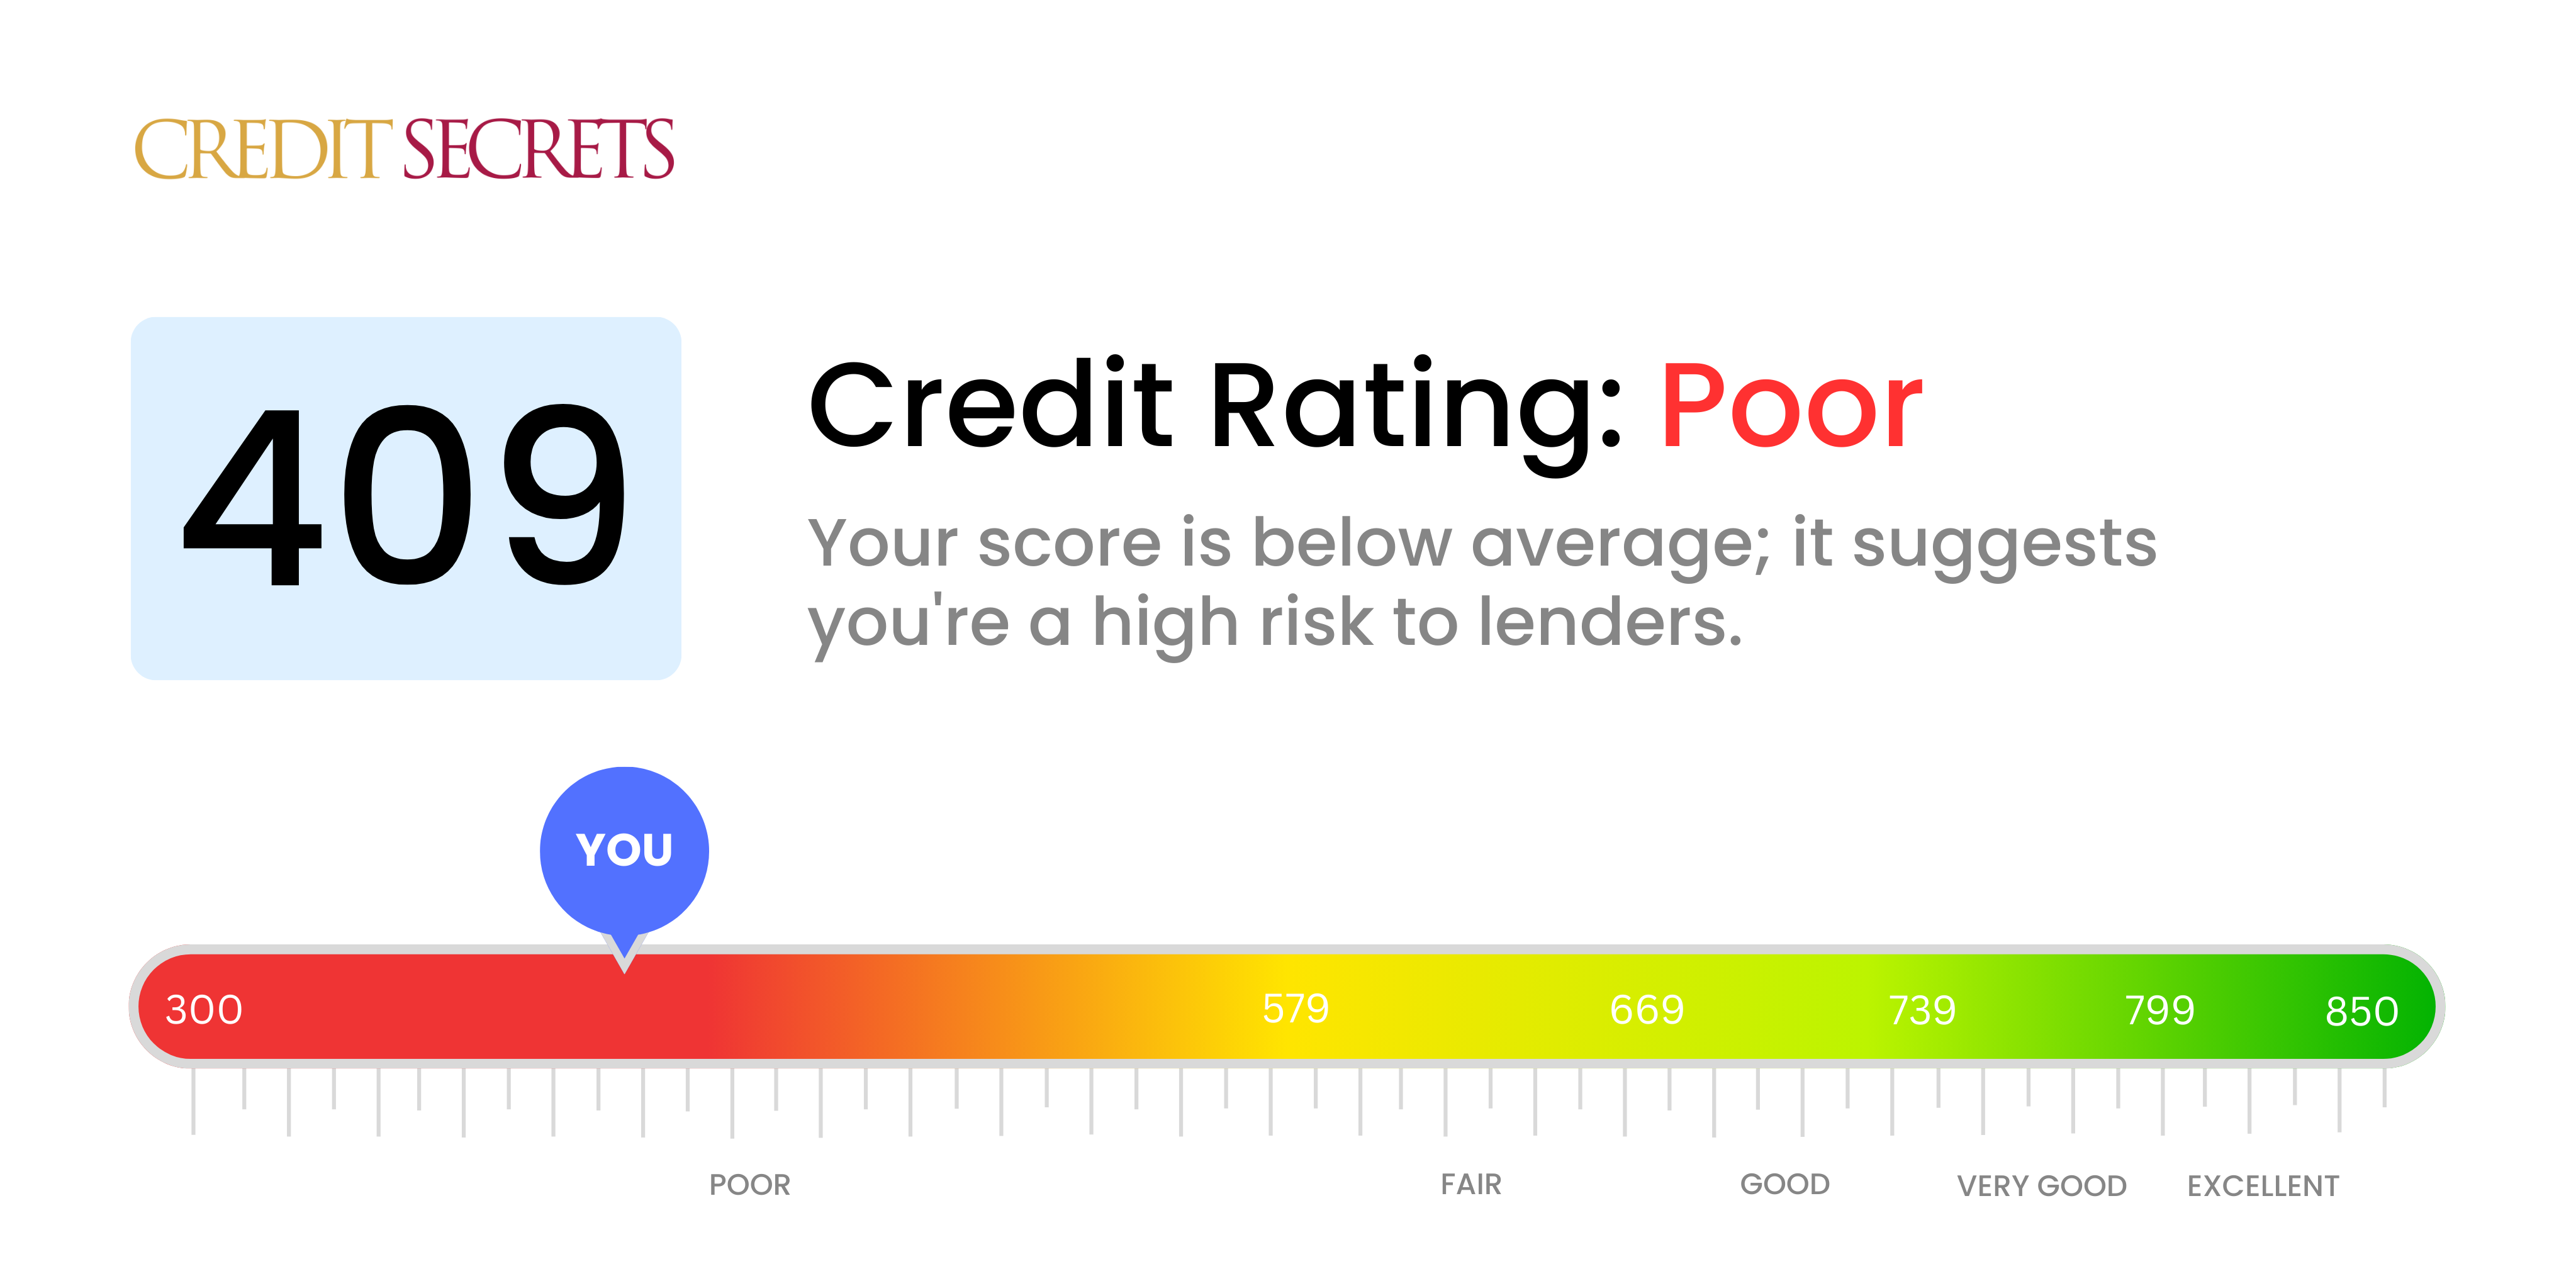 Is 409 a good credit score?